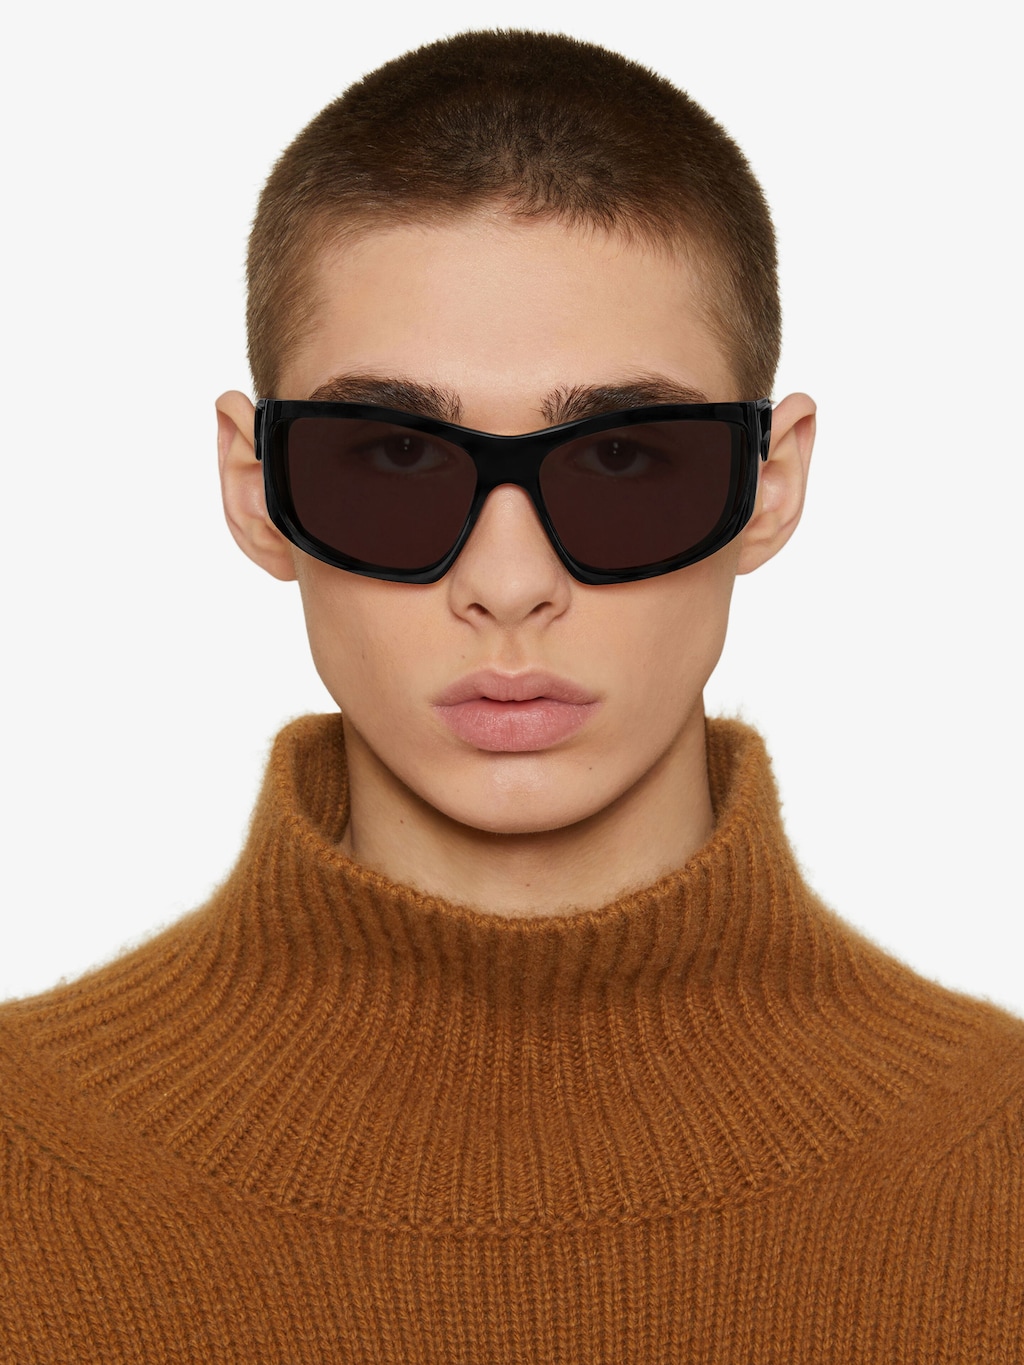 Giv Cut unisex injected sunglasses | Givenchy GB | Givenchy